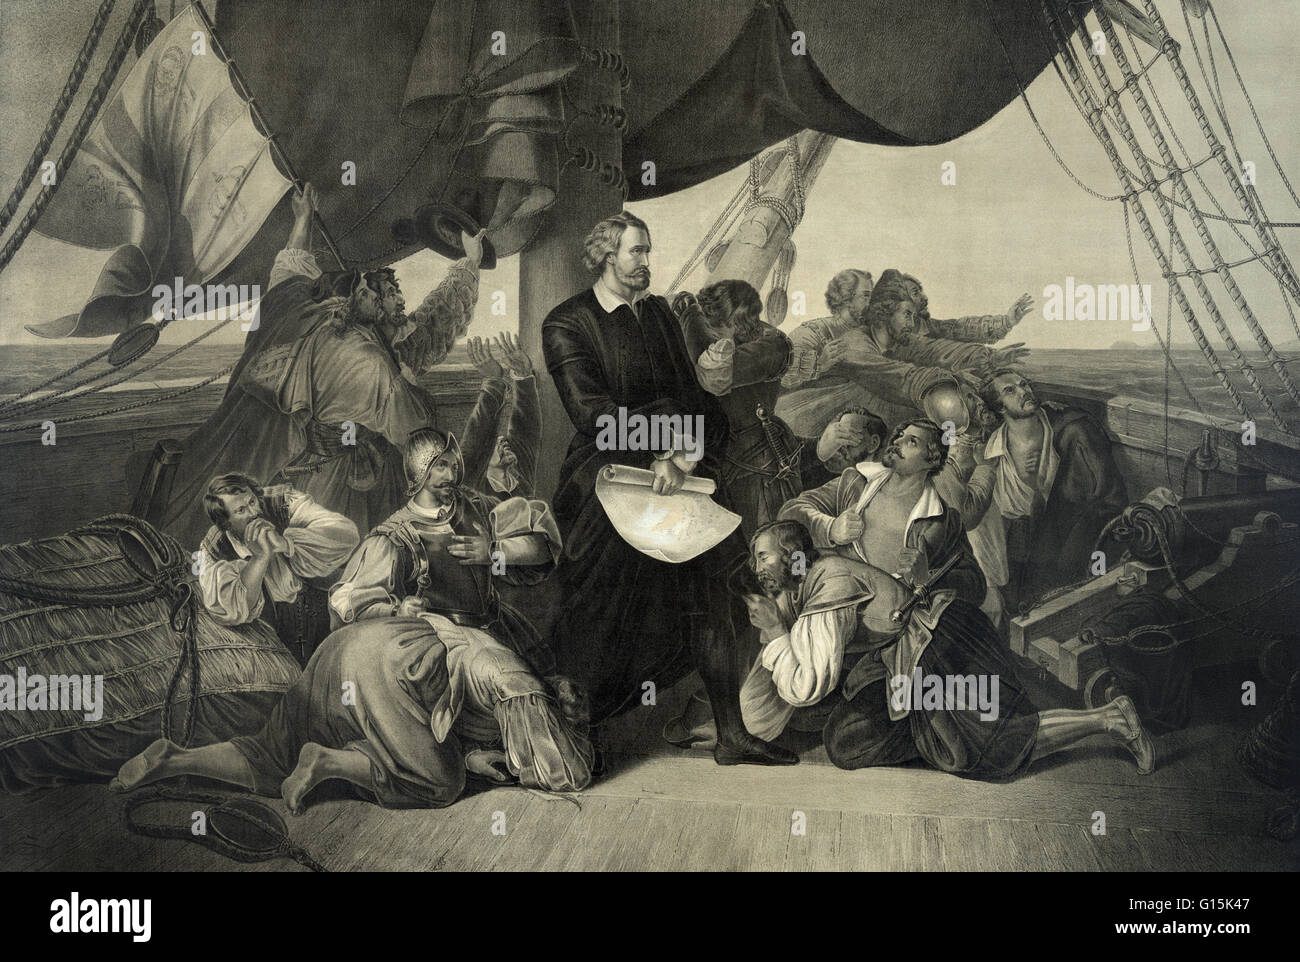 Lithograph entitled: The first sight of the new world, Columbus discovering America. Christopher Columbus (1451-1506) was an Italian explorer, colonizer, and navigator. Under the support of the Catholic Monarchs of Spain (King Ferdinand and Queen Isabella Stock Photo